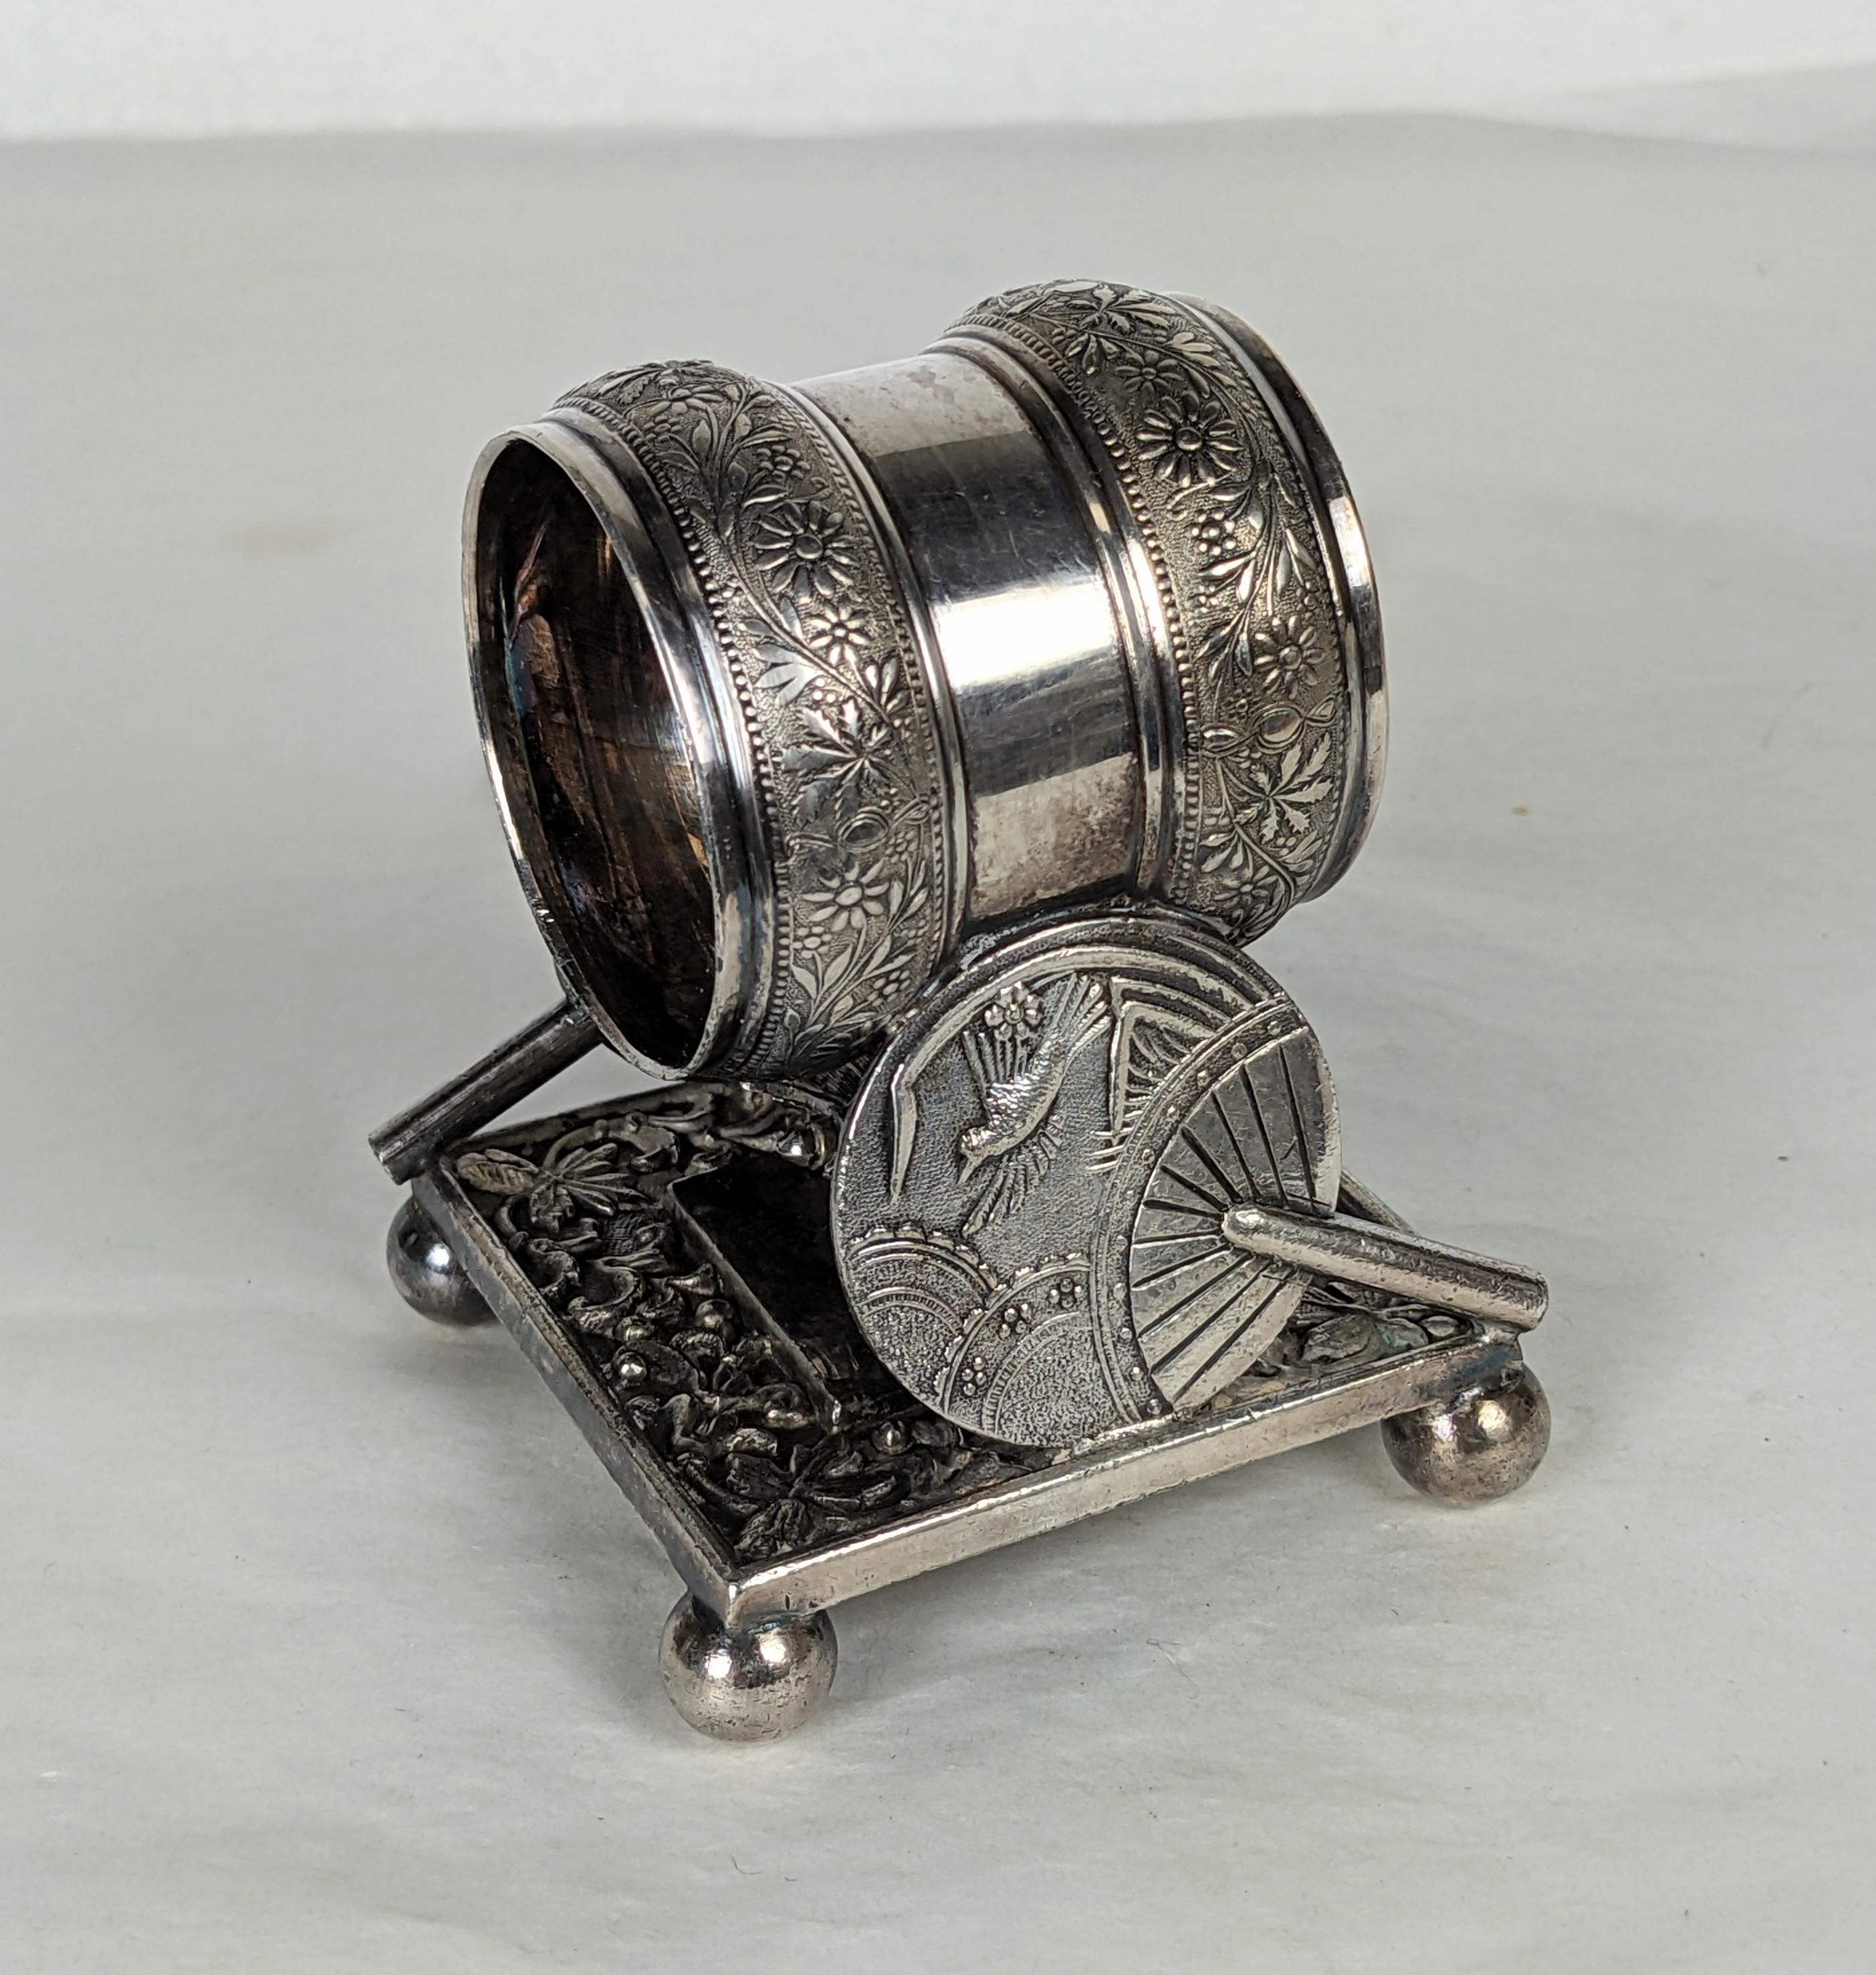 Victorian Aesthetic Silverplate Napkin Ring by Meriden Co. Charming details include Japonesque fan, florals and hidden butterfly under ring. 1870's USA. 